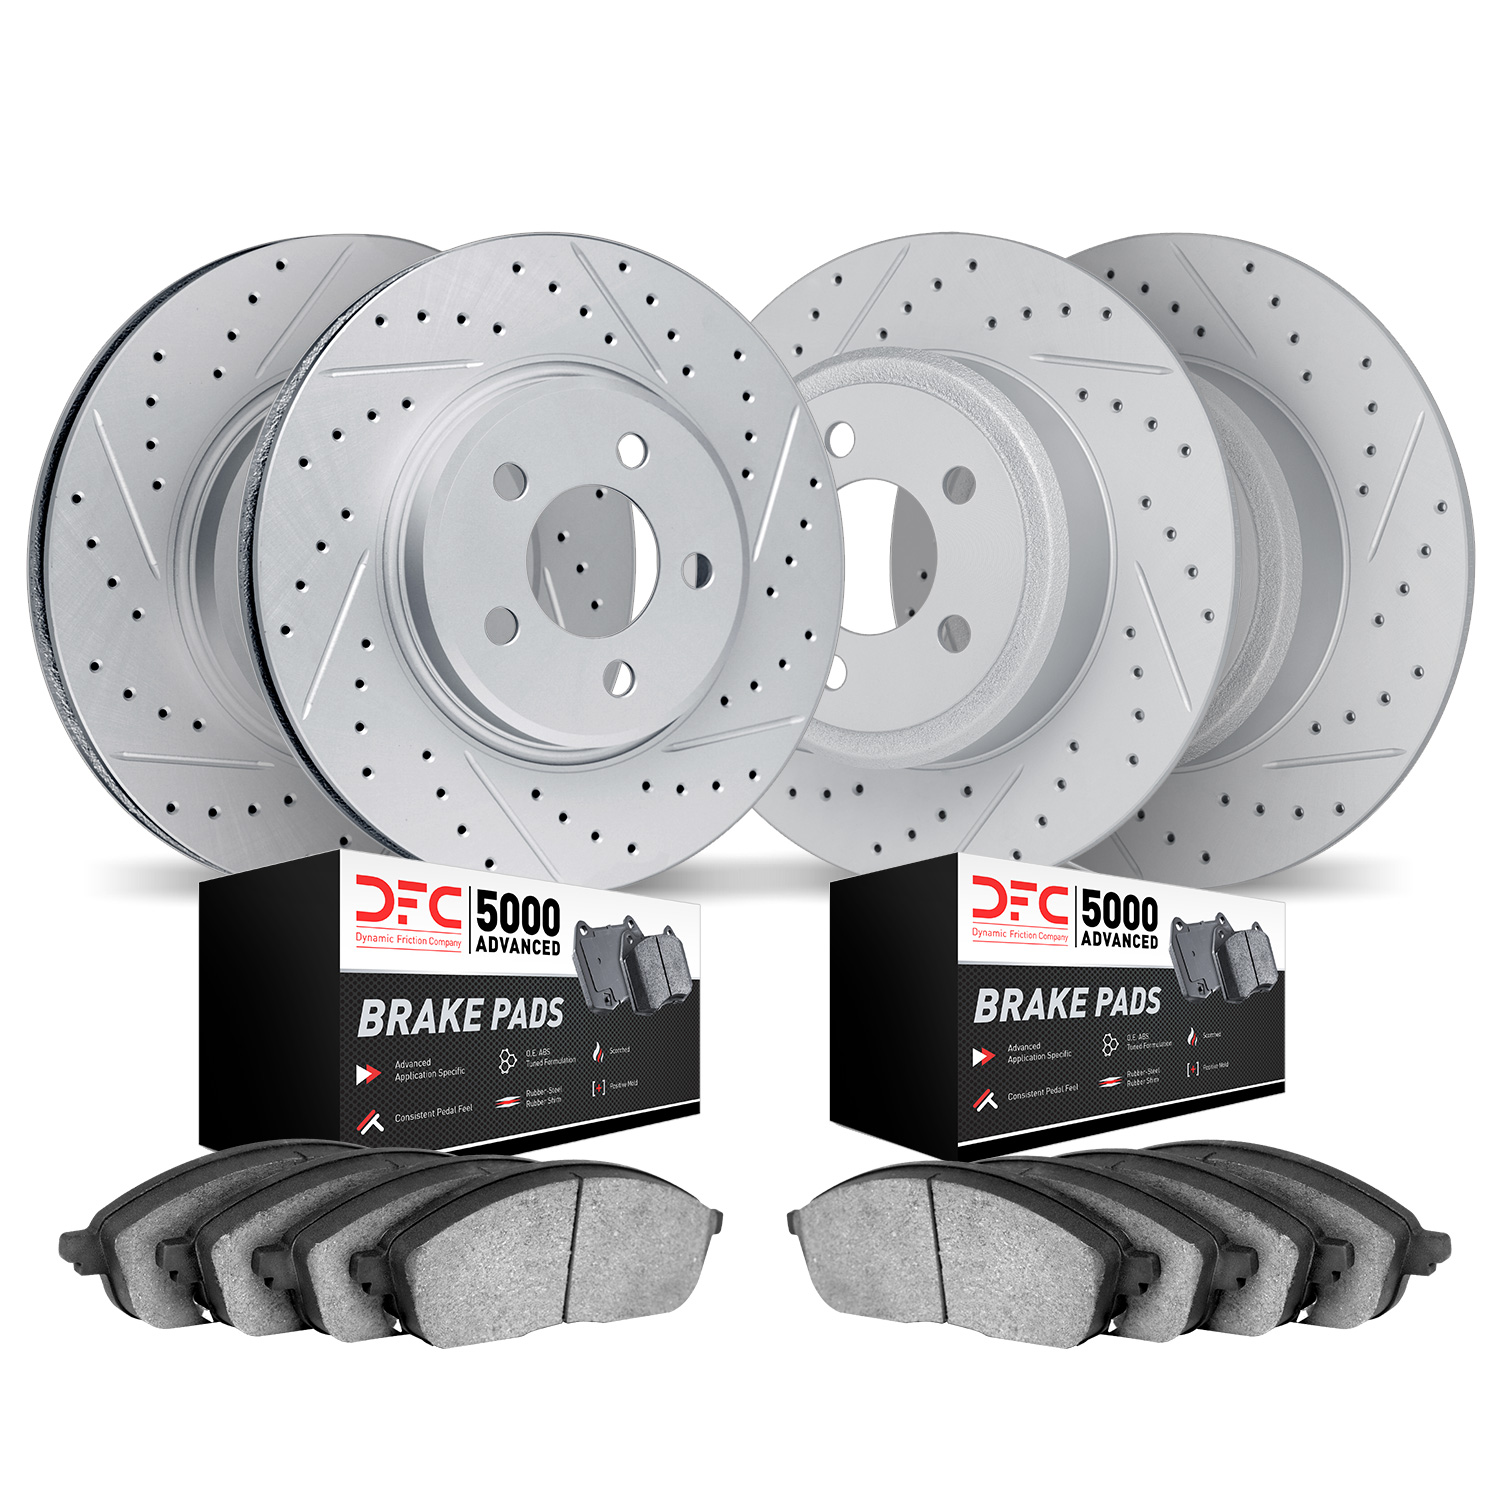 2504-54233 Geoperformance Drilled/Slotted Rotors w/5000 Advanced Brake Pads Kit, 1995-2002 Ford/Lincoln/Mercury/Mazda, Position: